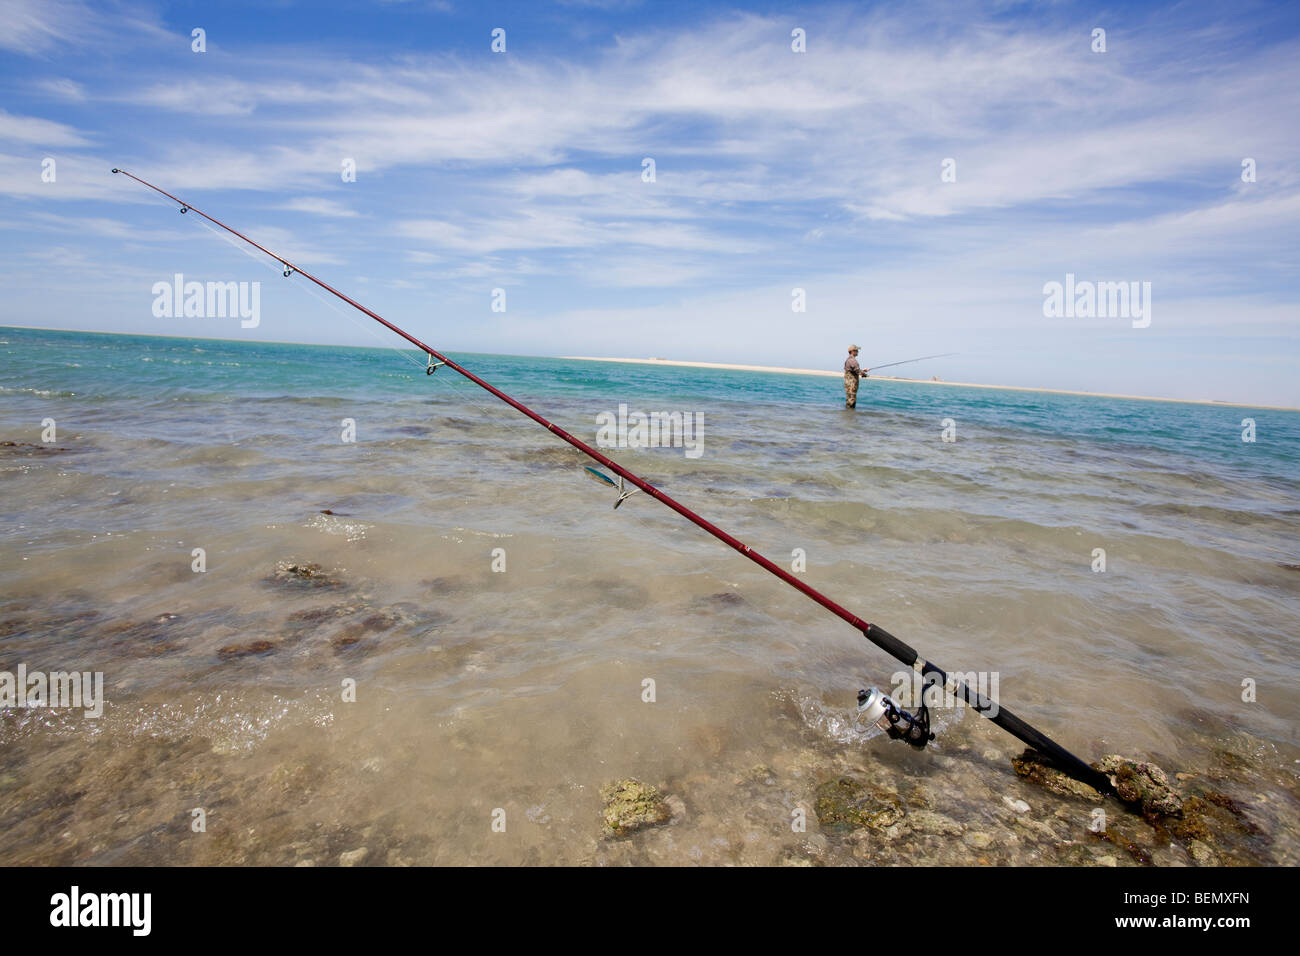 Fishing rod setup along the beach while a fisherman seeks his catch in the sea. Stock Photo